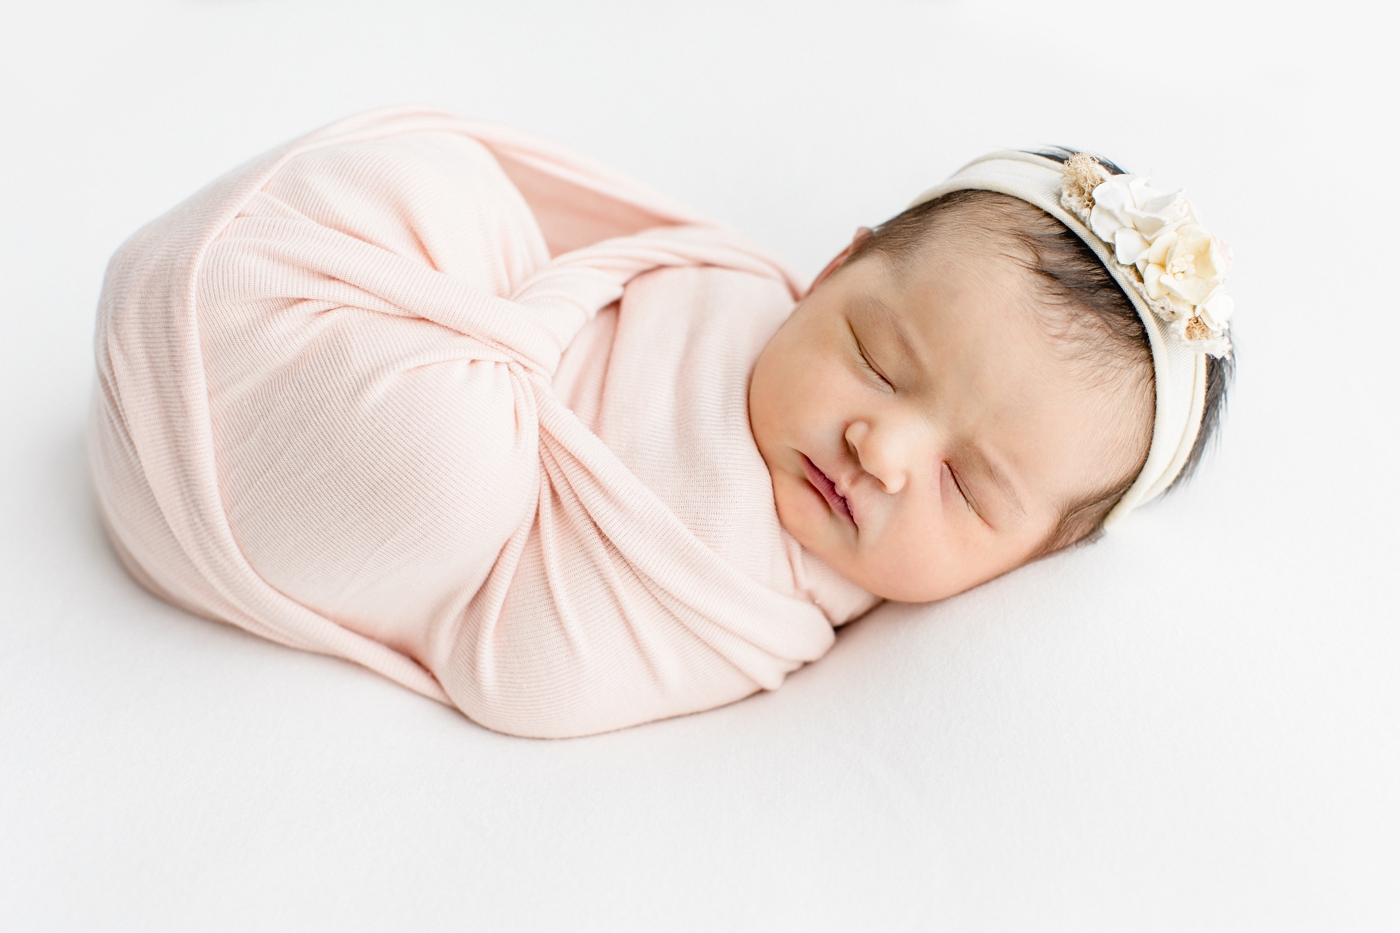 Baby in light pink swaddle with floral headband. Photo by Sana Ahmed Photography.